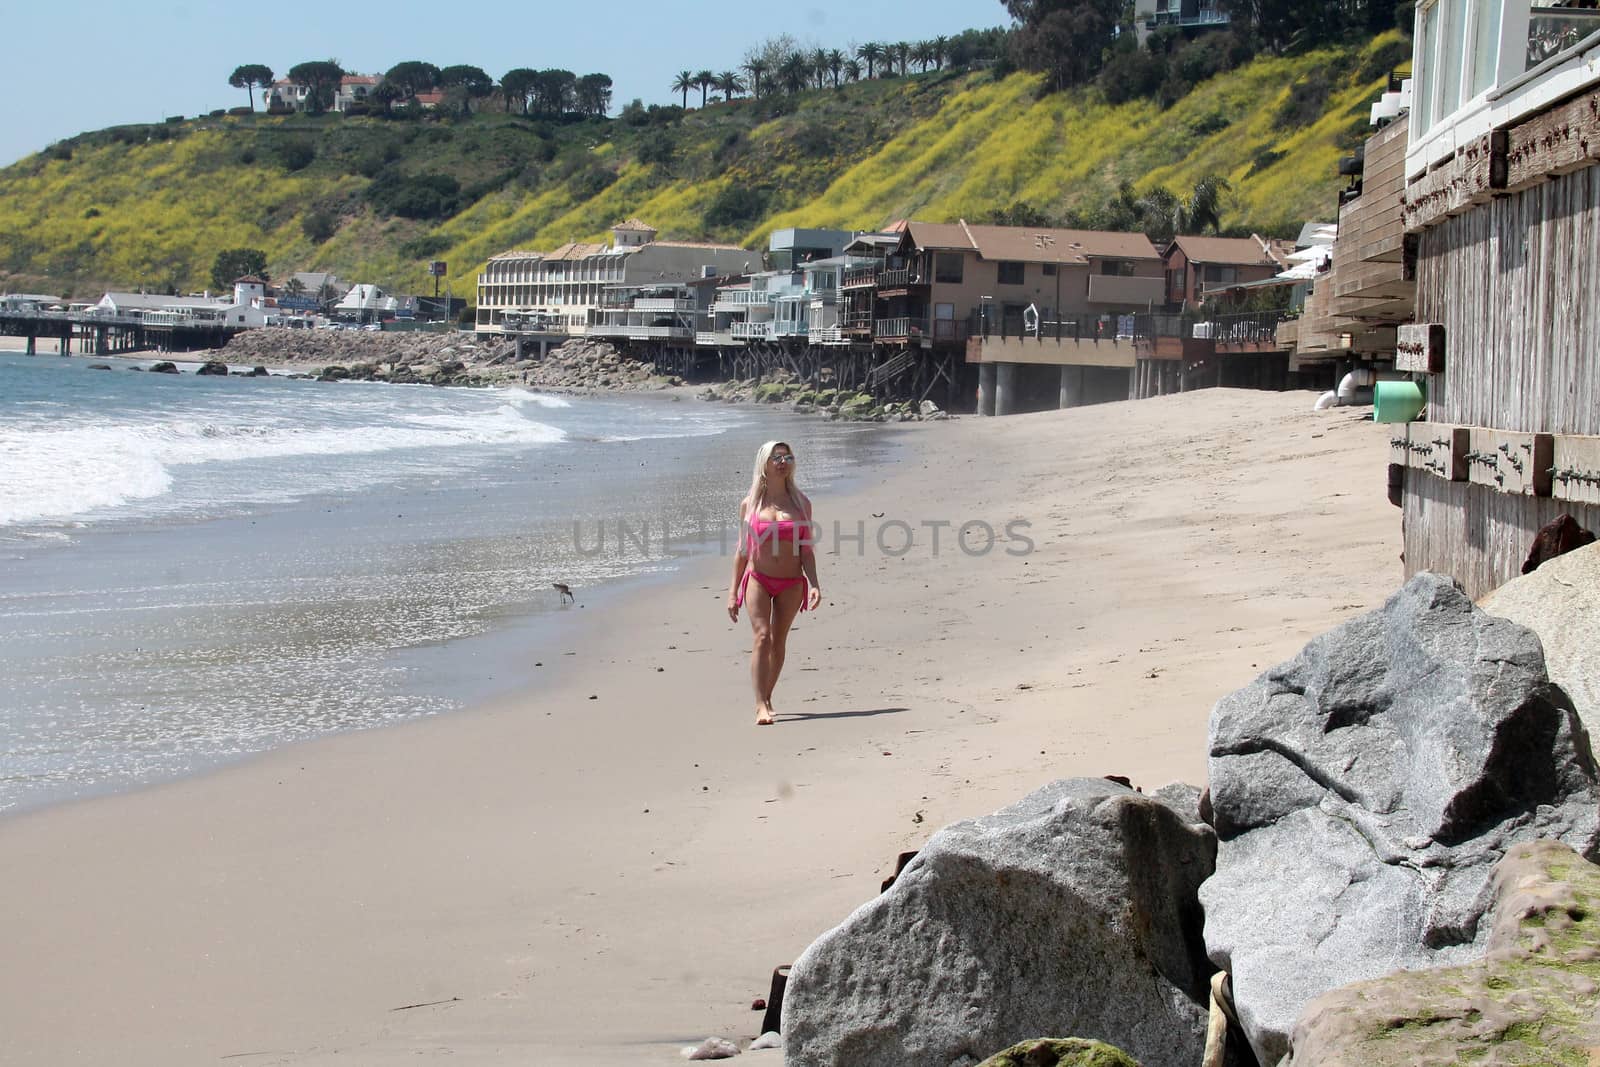 Frenchy Morgan the "Celebrity Big Brother" Star is spotted doing yoga and karate on the beach while wearing a tiny pink bikini, Malibu, CA 04-21-17/ImageCollect by ImageCollect